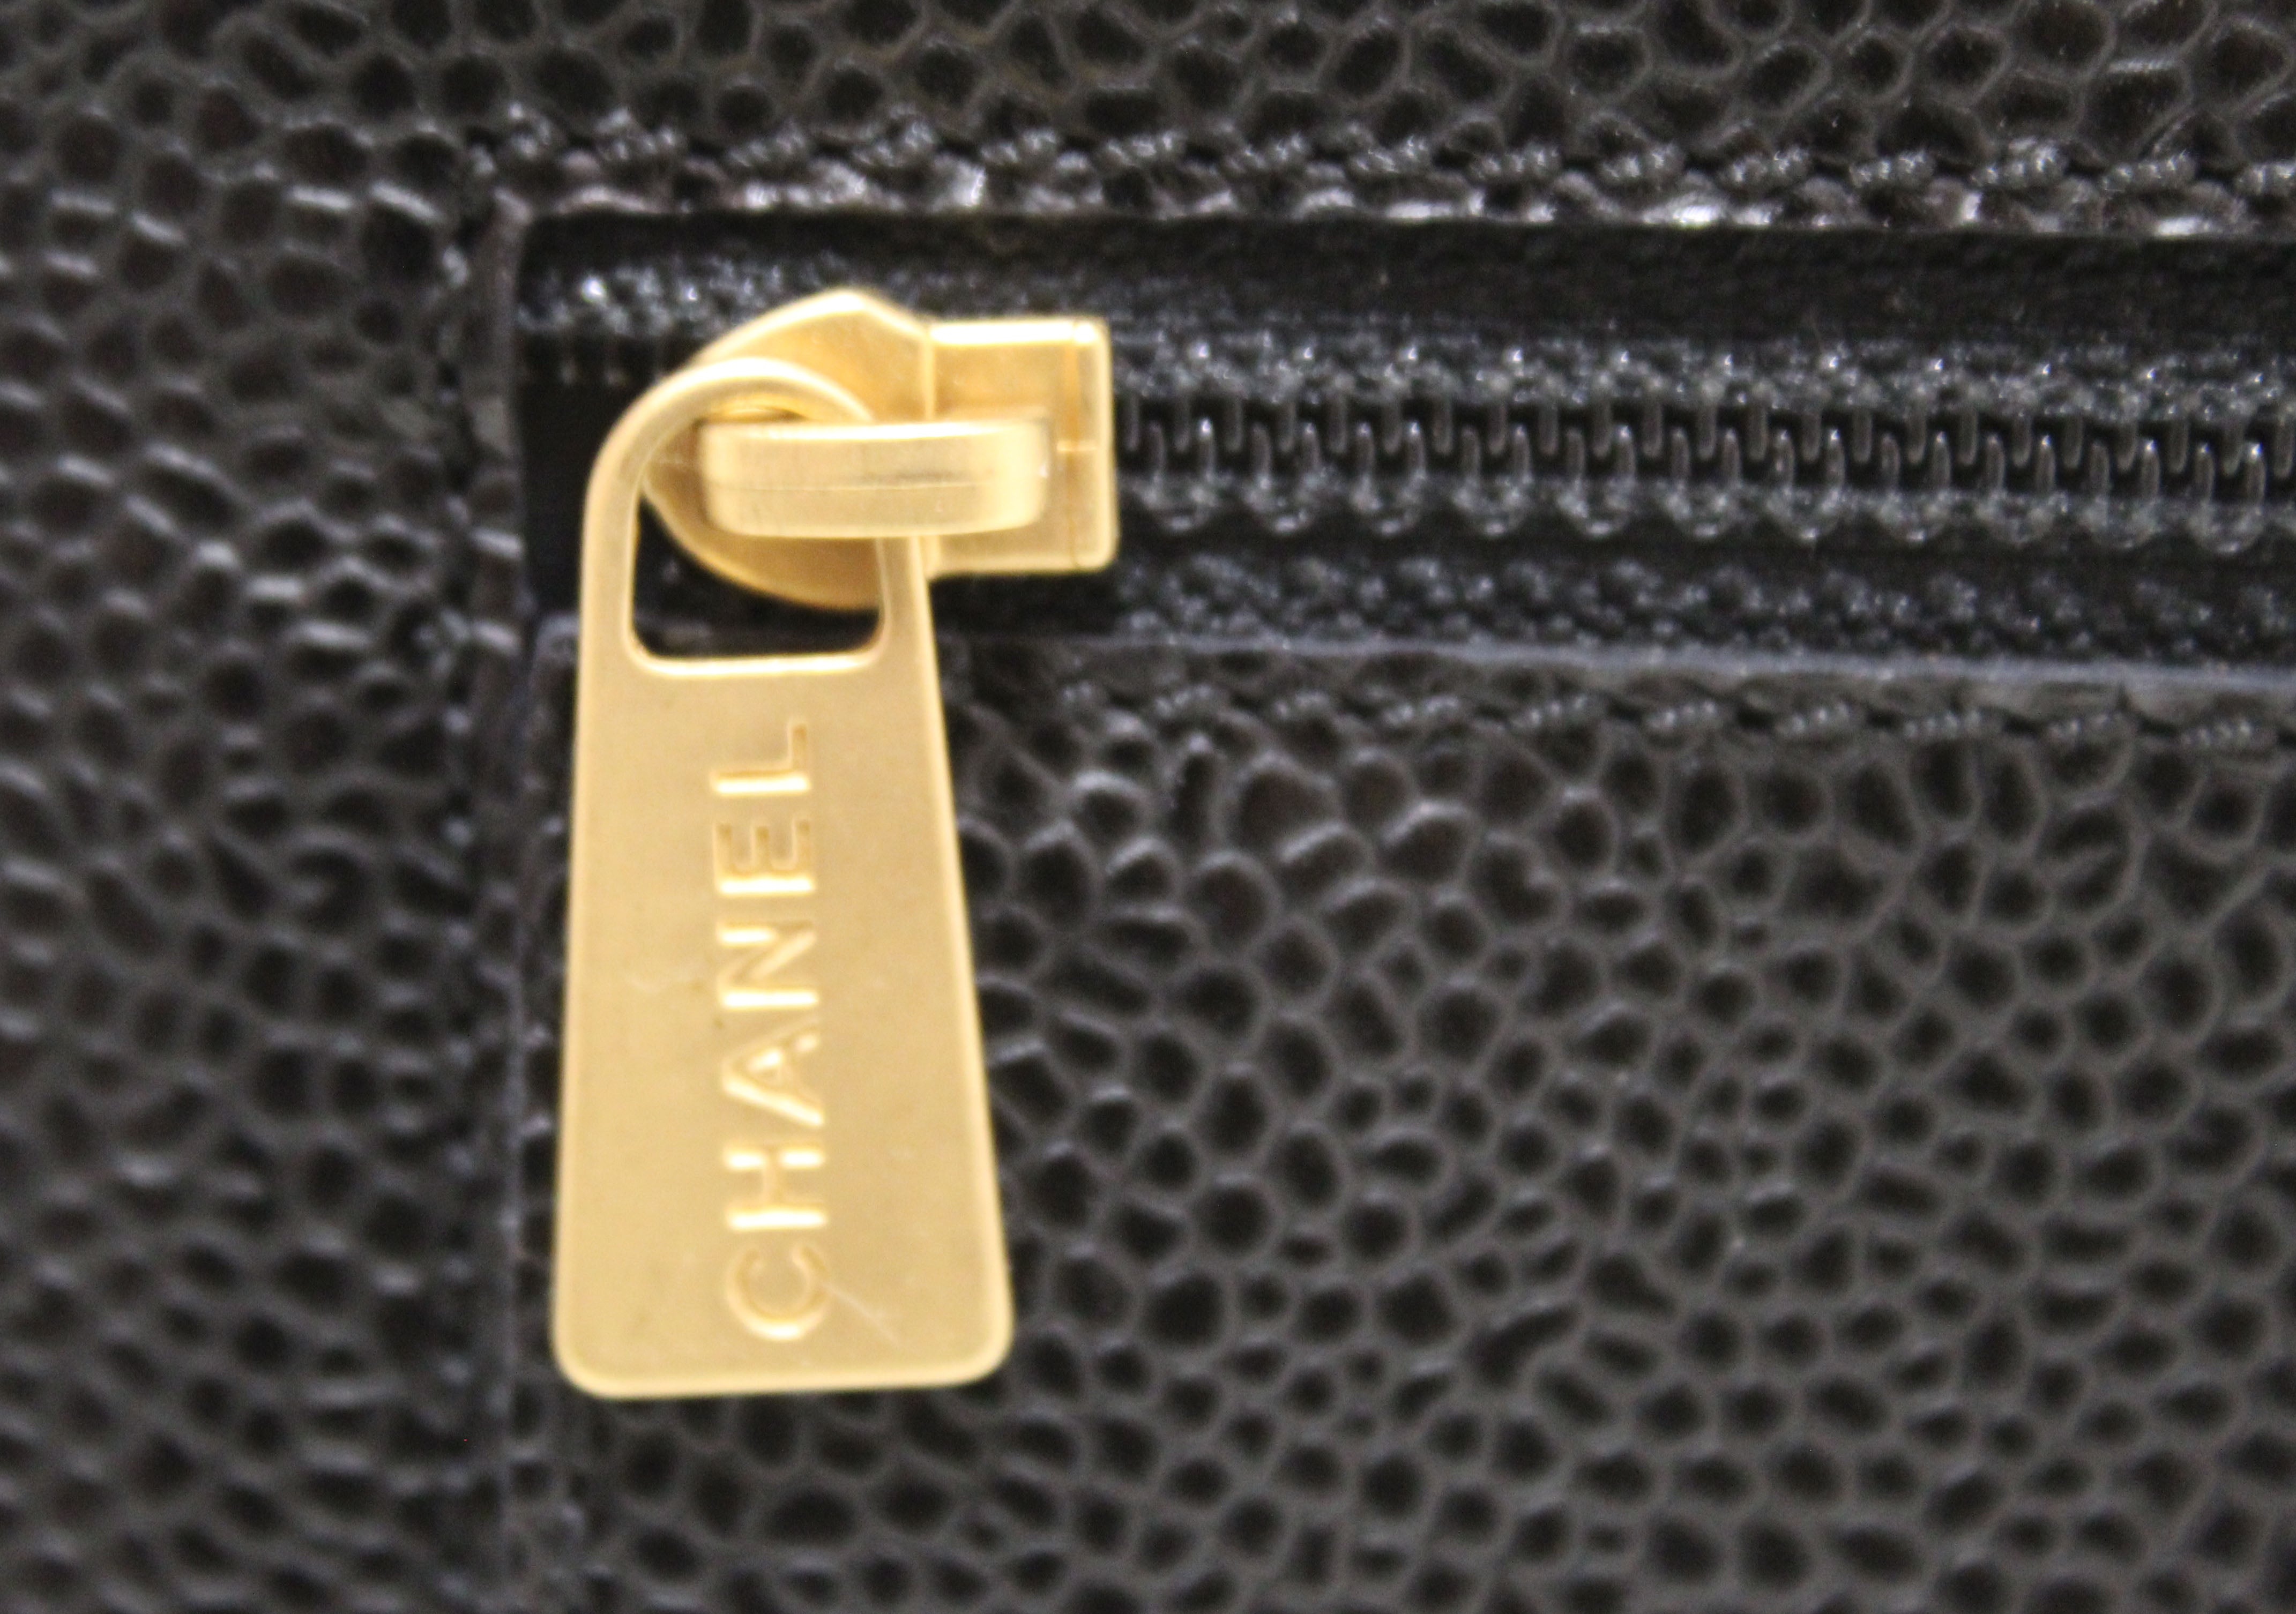 Authentic New Chanel Black Caviar Leather Classic CC Timeless Medium Trifold Wallet